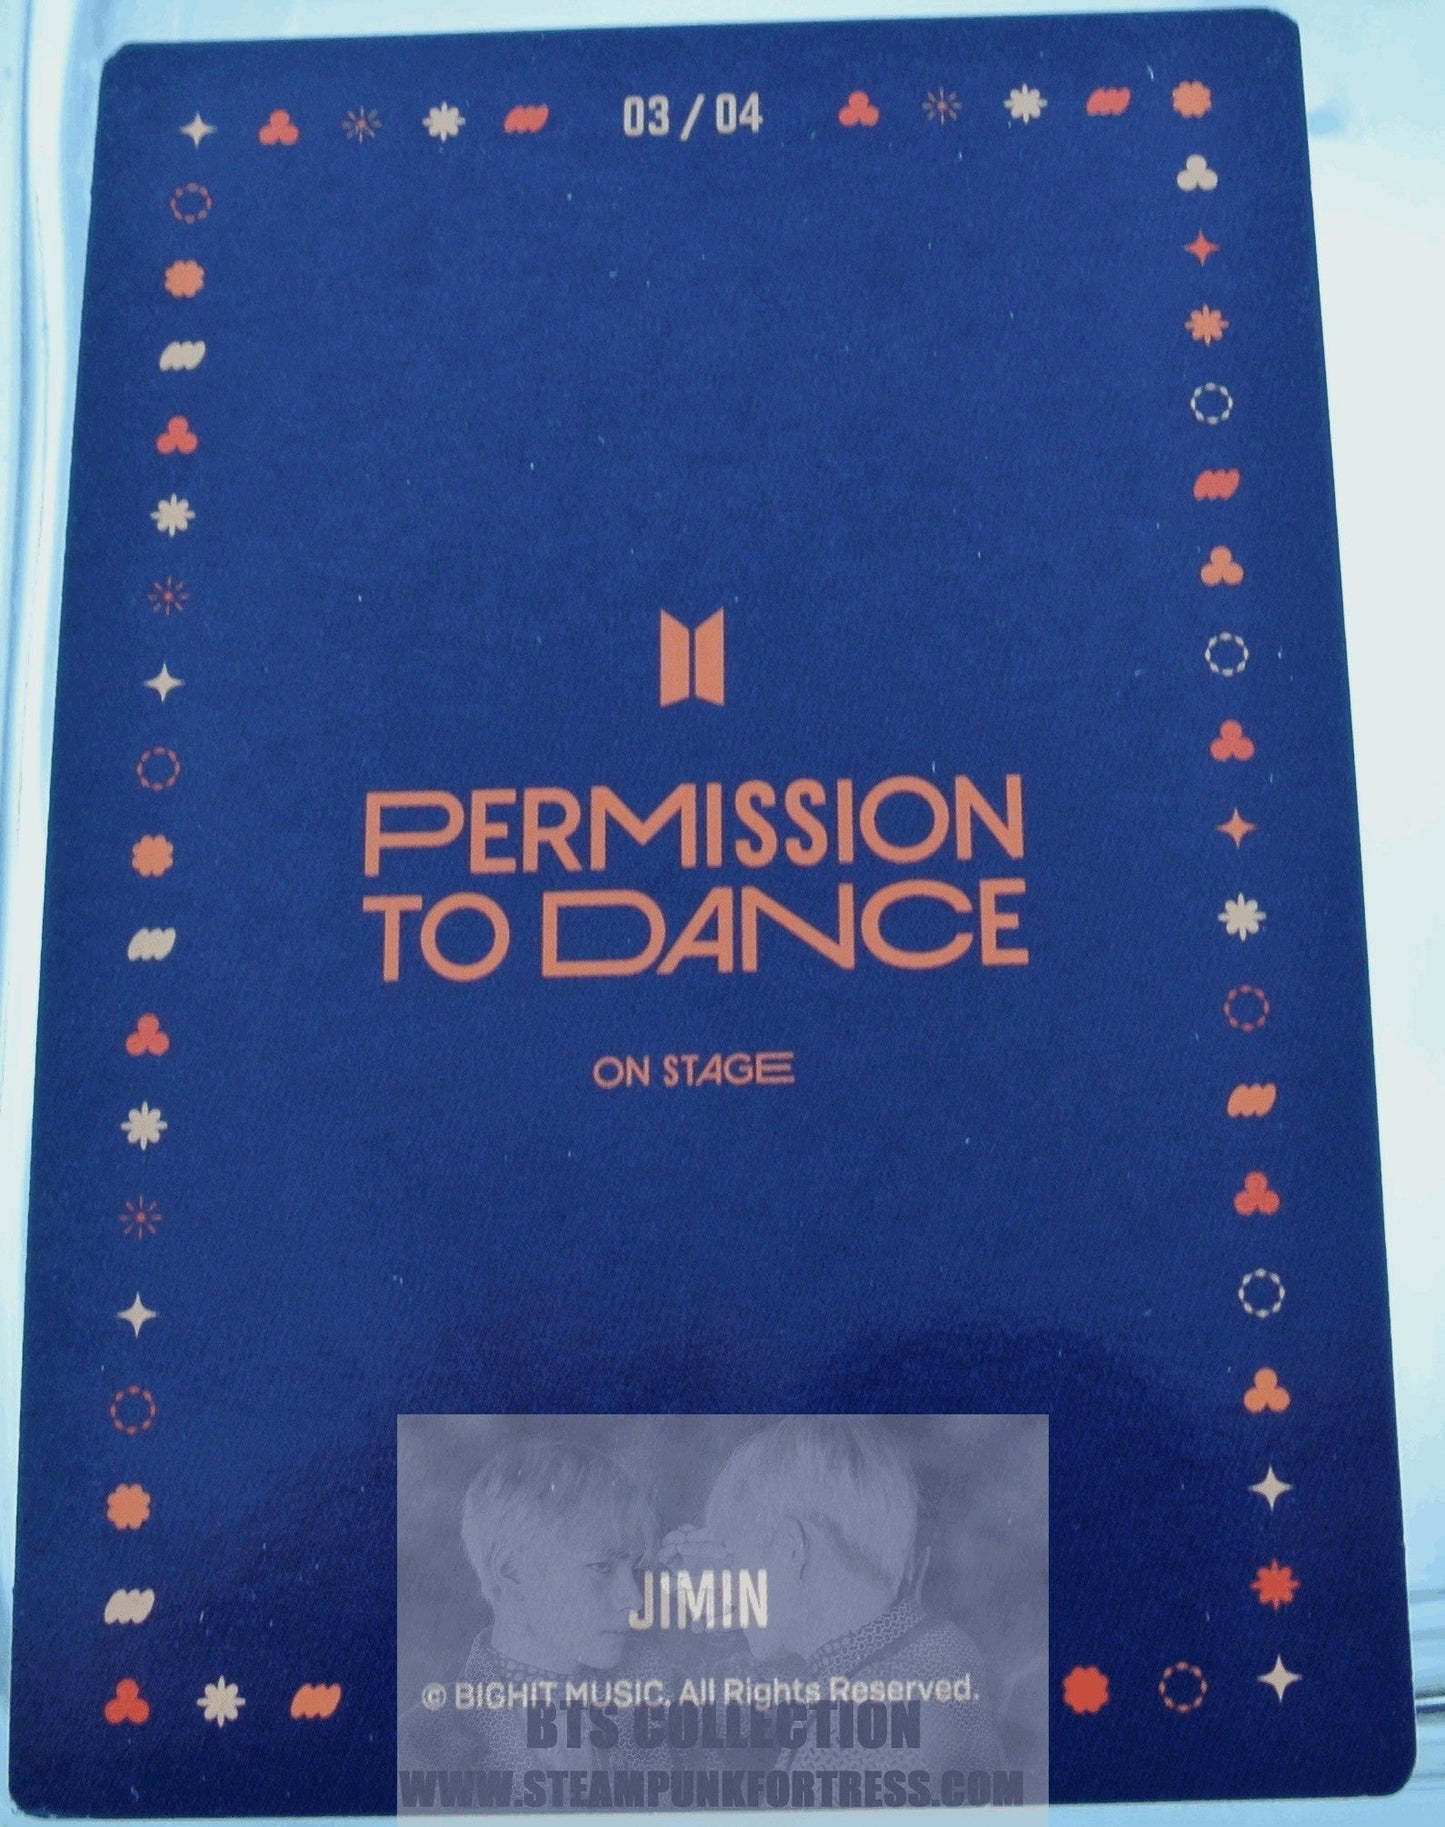 BTS JIMIN PARK JI-MIN 2022 PERMISSION TO DANCE ON STAGE SEOUL PTD #3 OF 4 PHOTOCARD PHOTO CARD NEW OFFICIAL MERCHANDISE